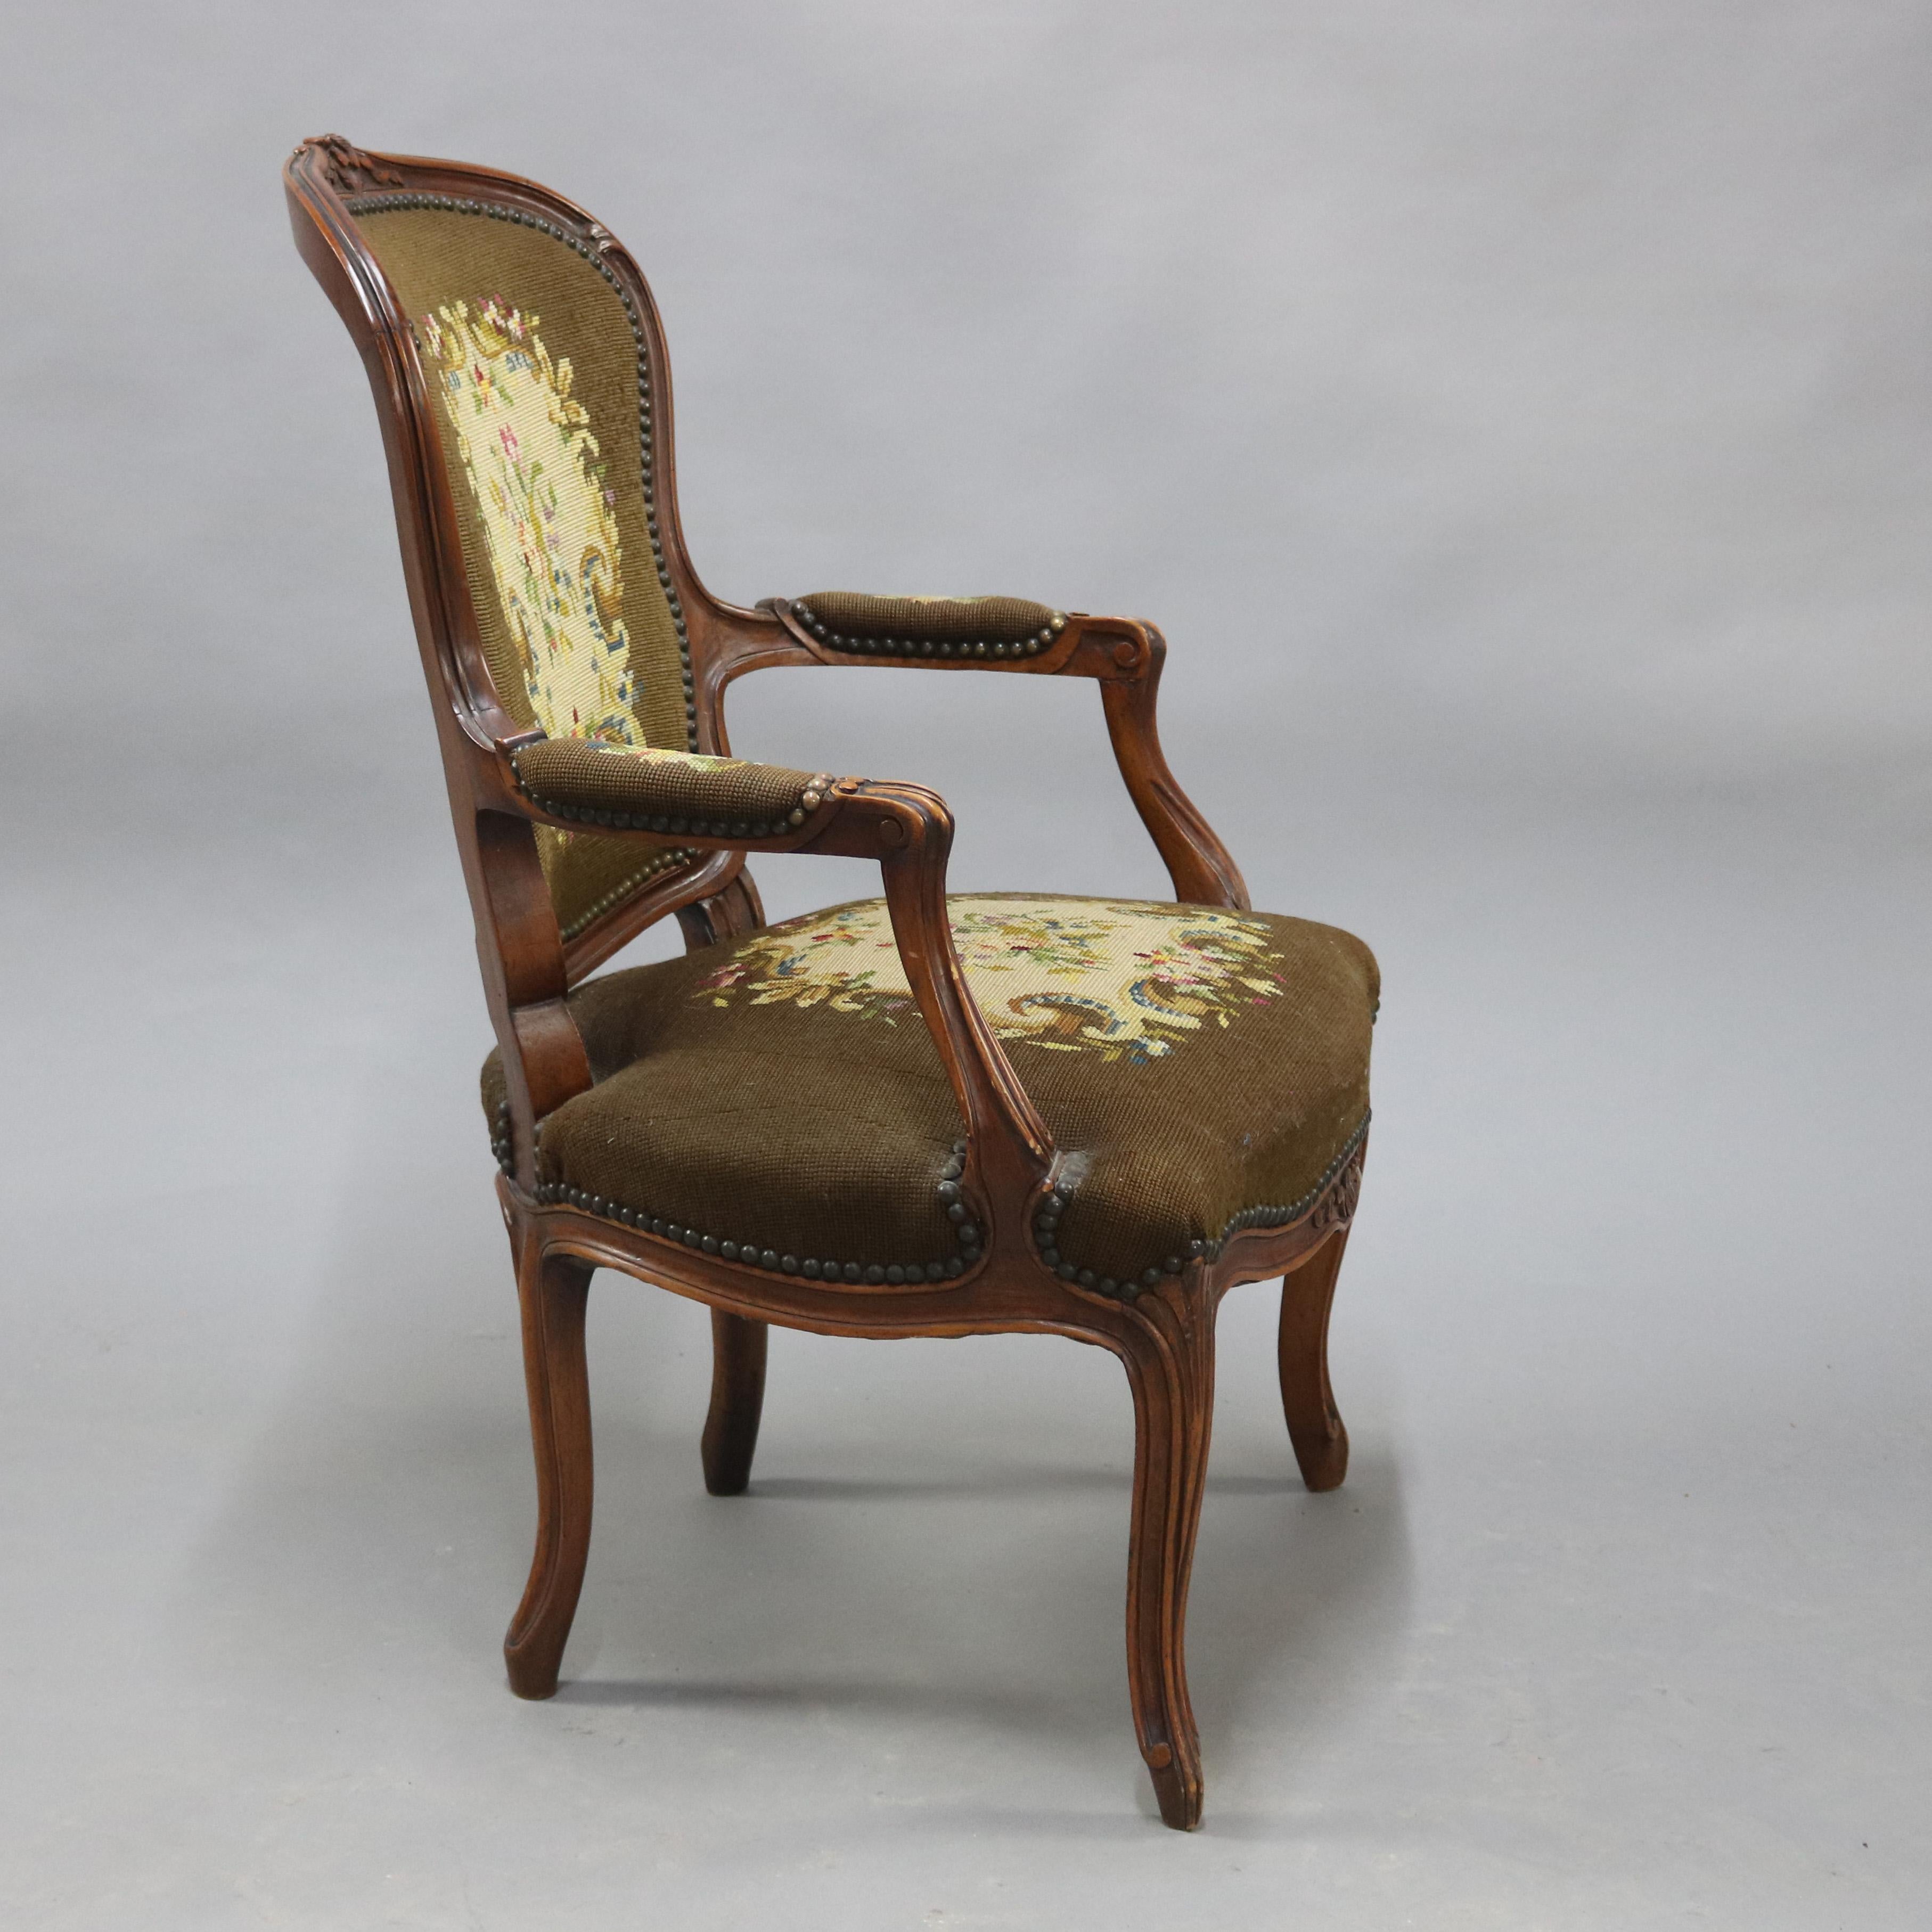 An antique French Louis XVI style armchair offers carved fruitwood frame raised on cabriole legs and having floral needlepoint back, seat and arms, circa 1900

Measures: 36